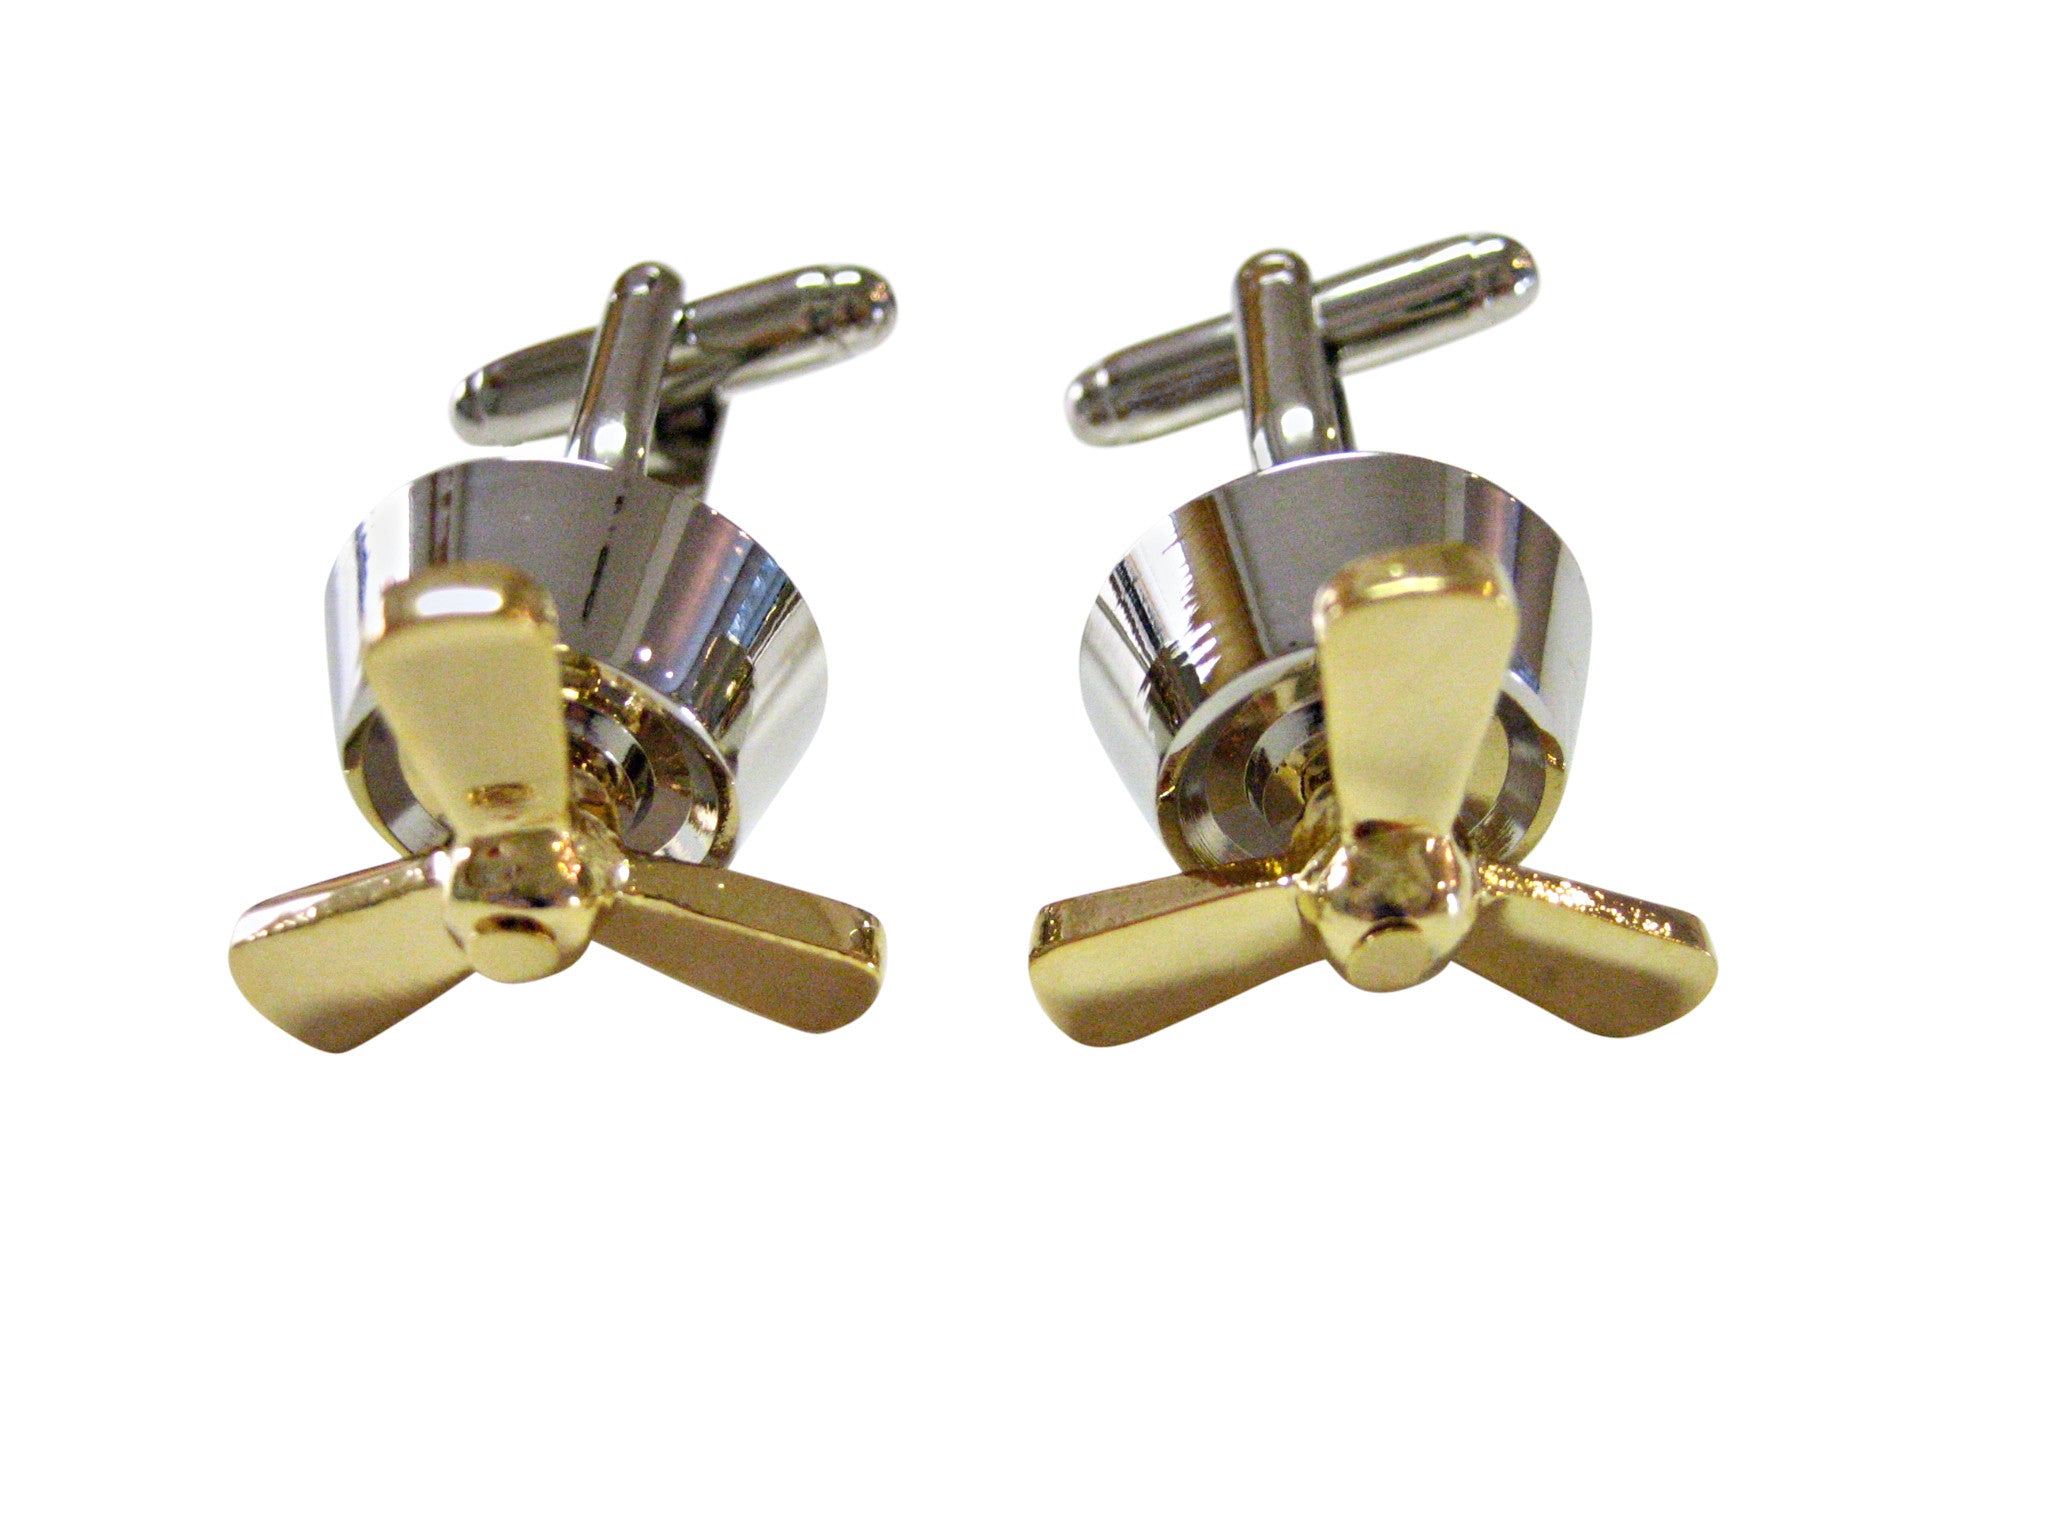 Gold and Silver Toned Propellor Cufflinks